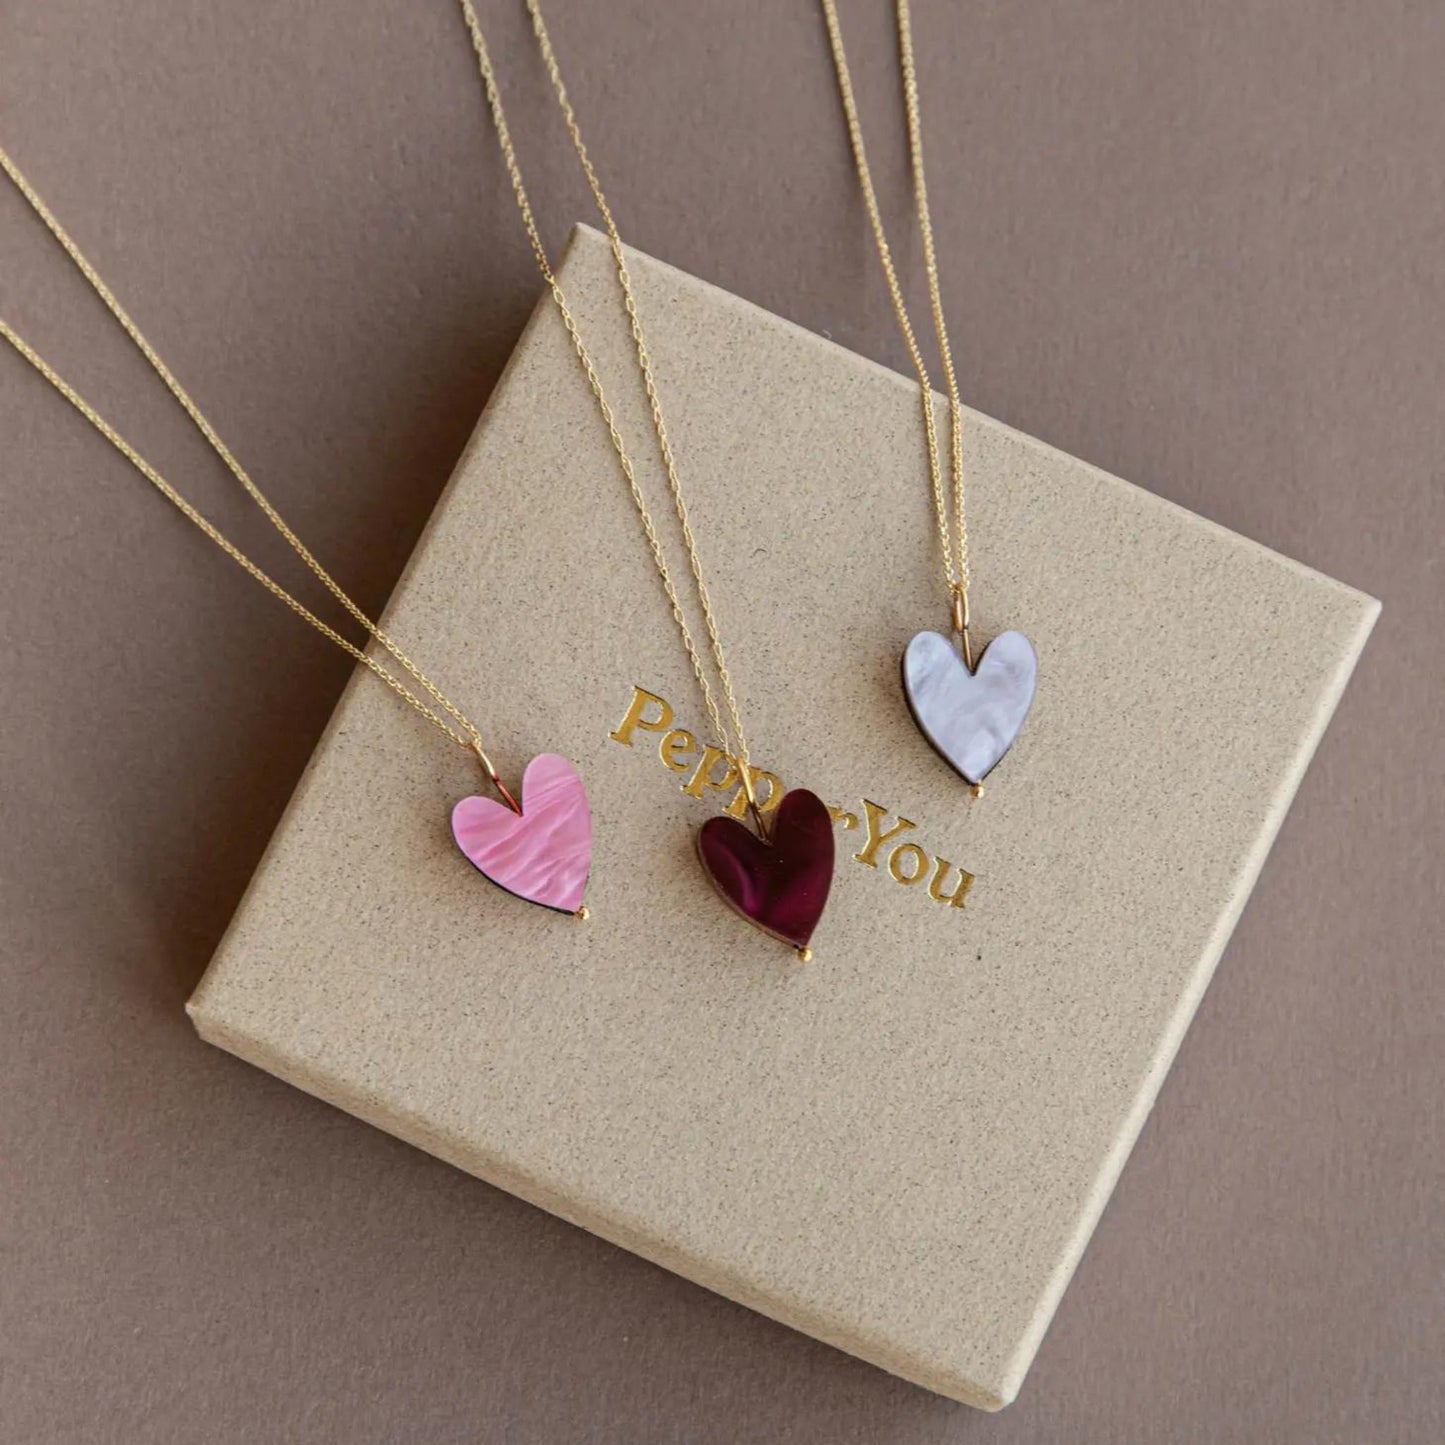 Love Grows Gold Necklace: Merlot Red Marble - The Little Jewellery Company